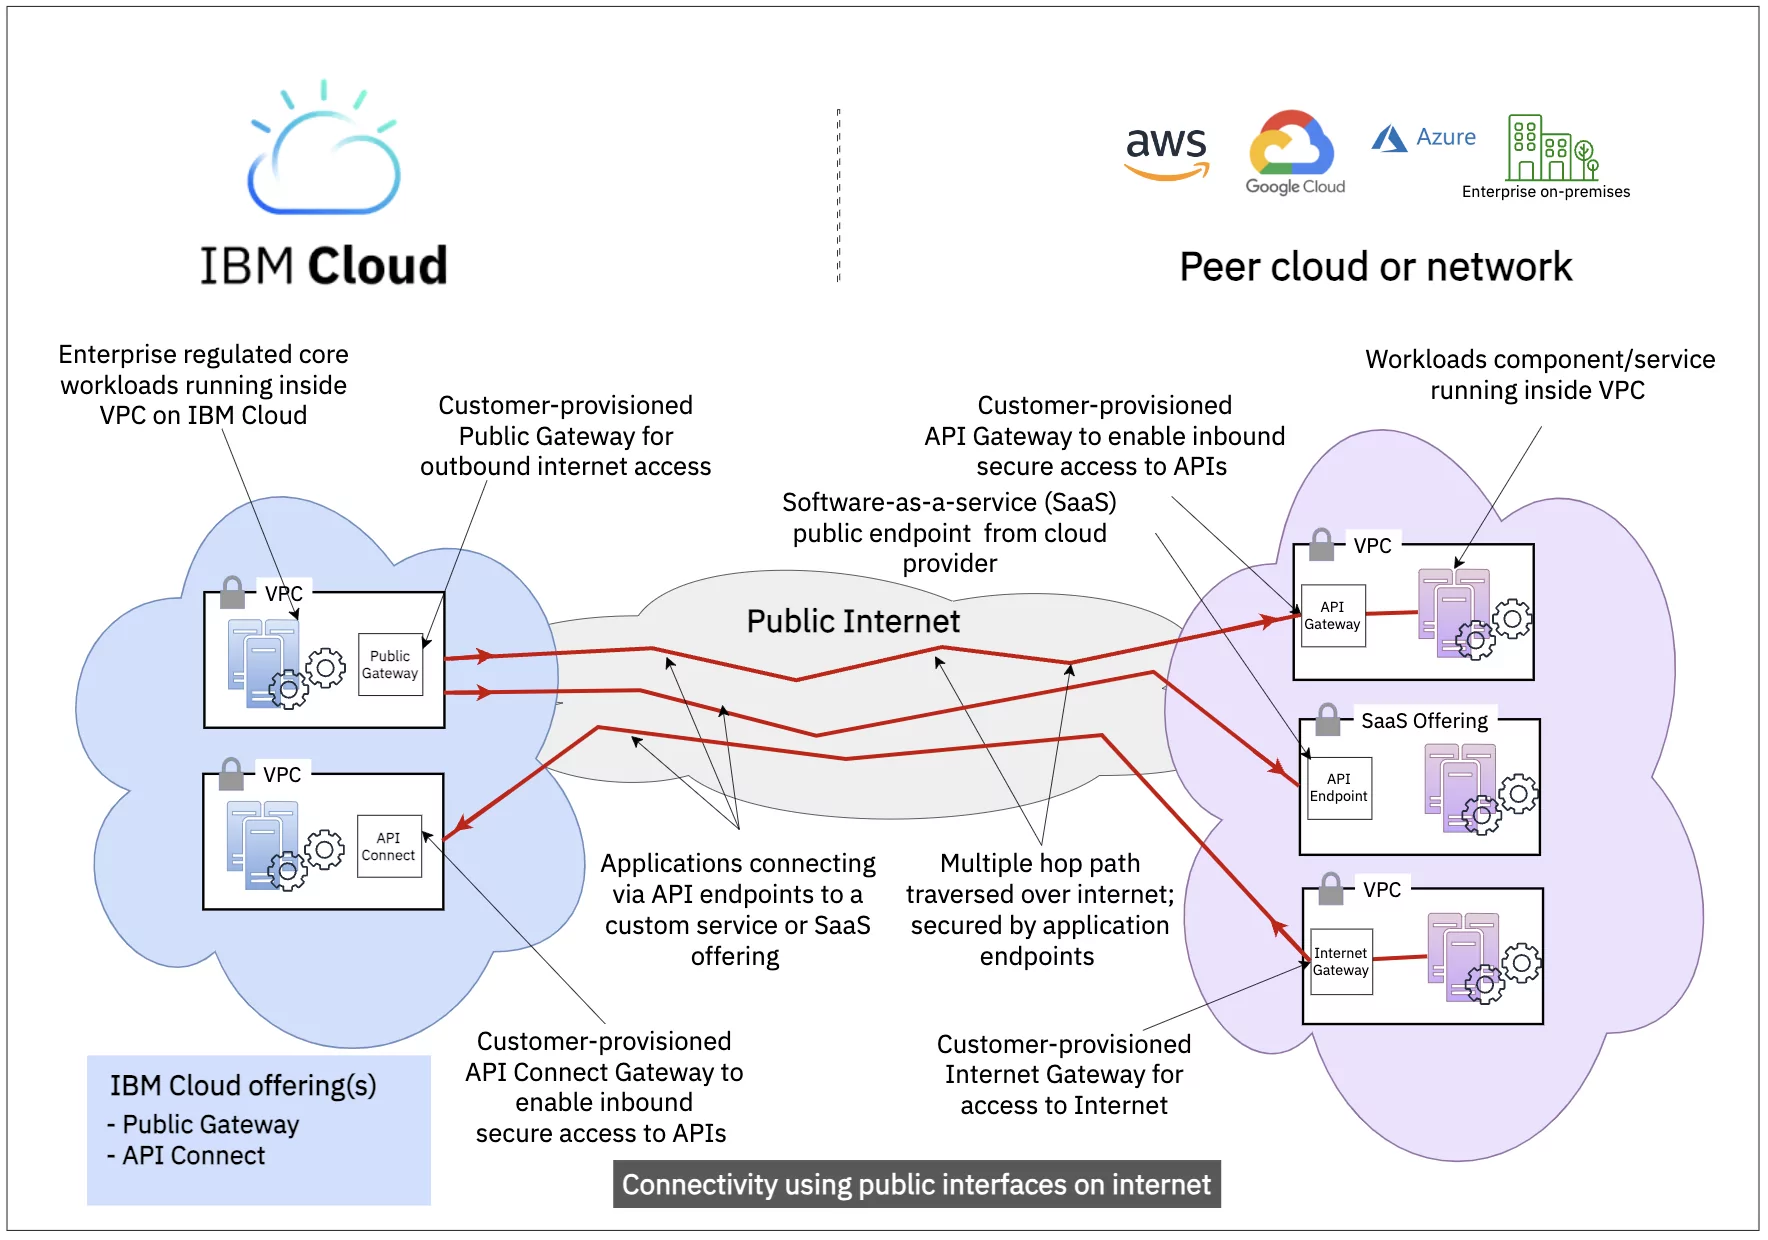 Figure 4: High-level view of the cloud-to-cloud connectivity between IBM Cloud and other peer cloud using public interfaces on internet.